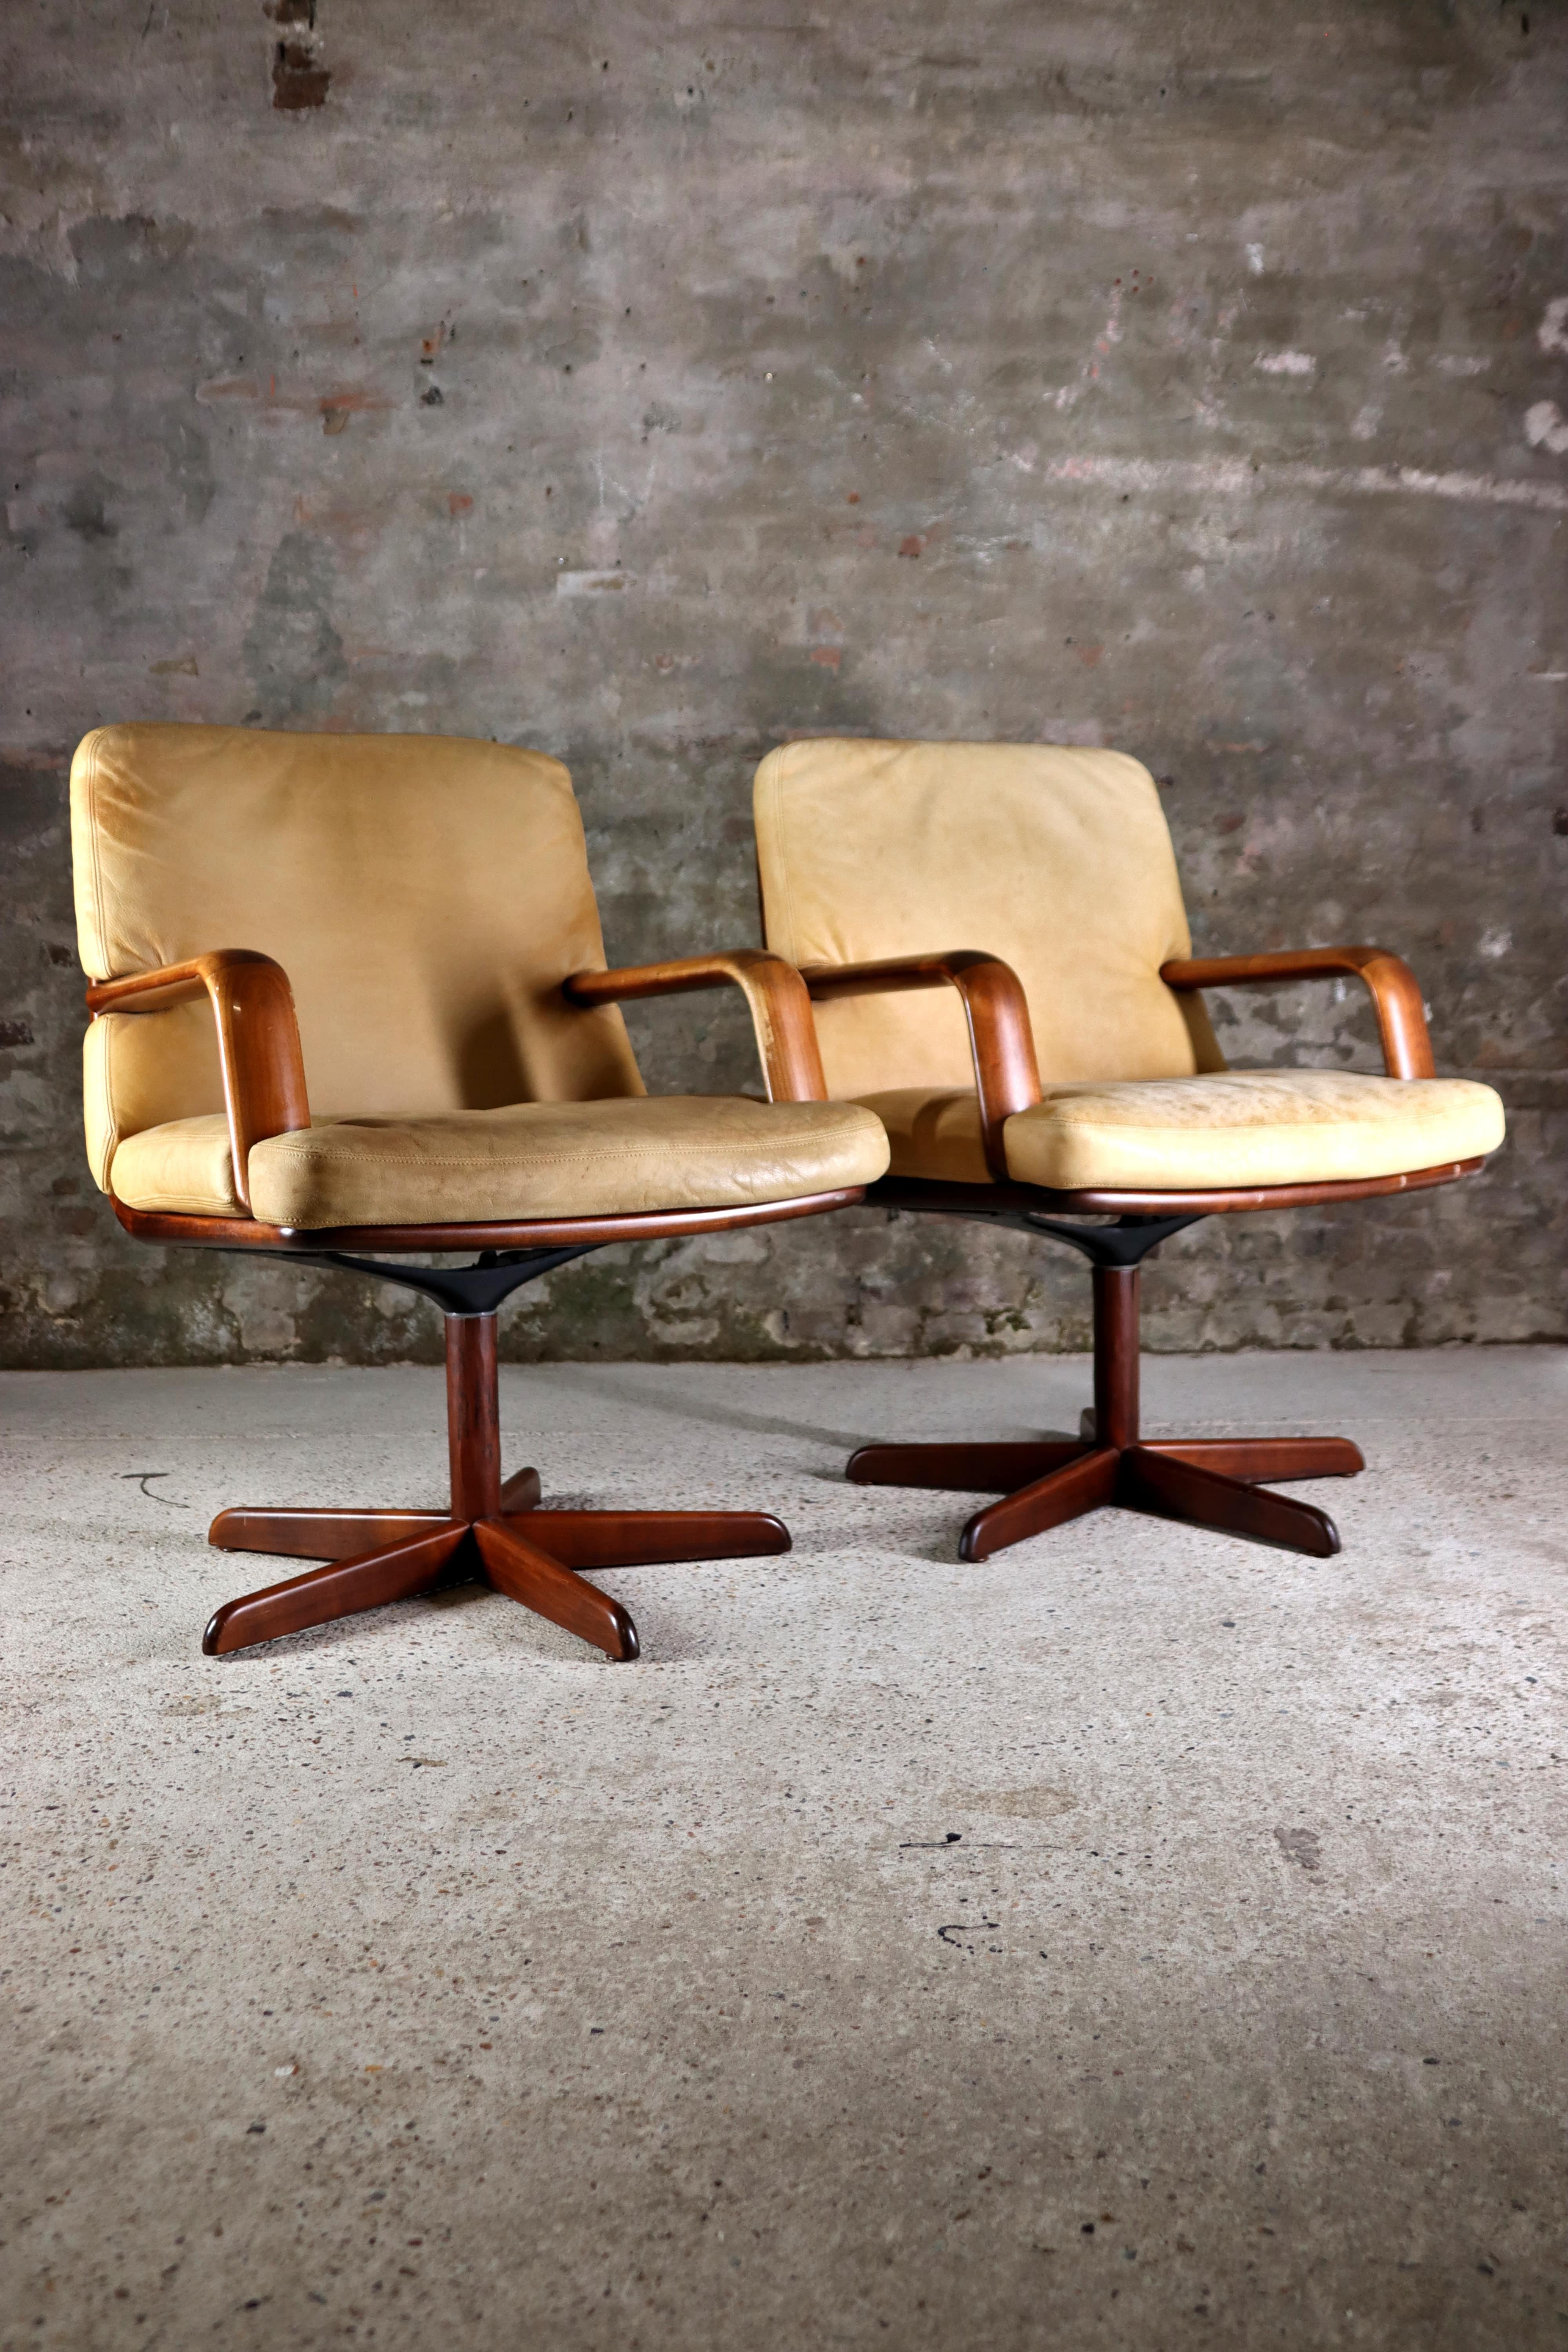 These awesome Don chairs are designed by Bernd Münzebrock for Walter Knoll, Germany 1970s. The model of the chair is ‘Don’ and they are very comfortable. Both chairs are marked underneath the seating with the manufacturers label ‘Walter Knoll